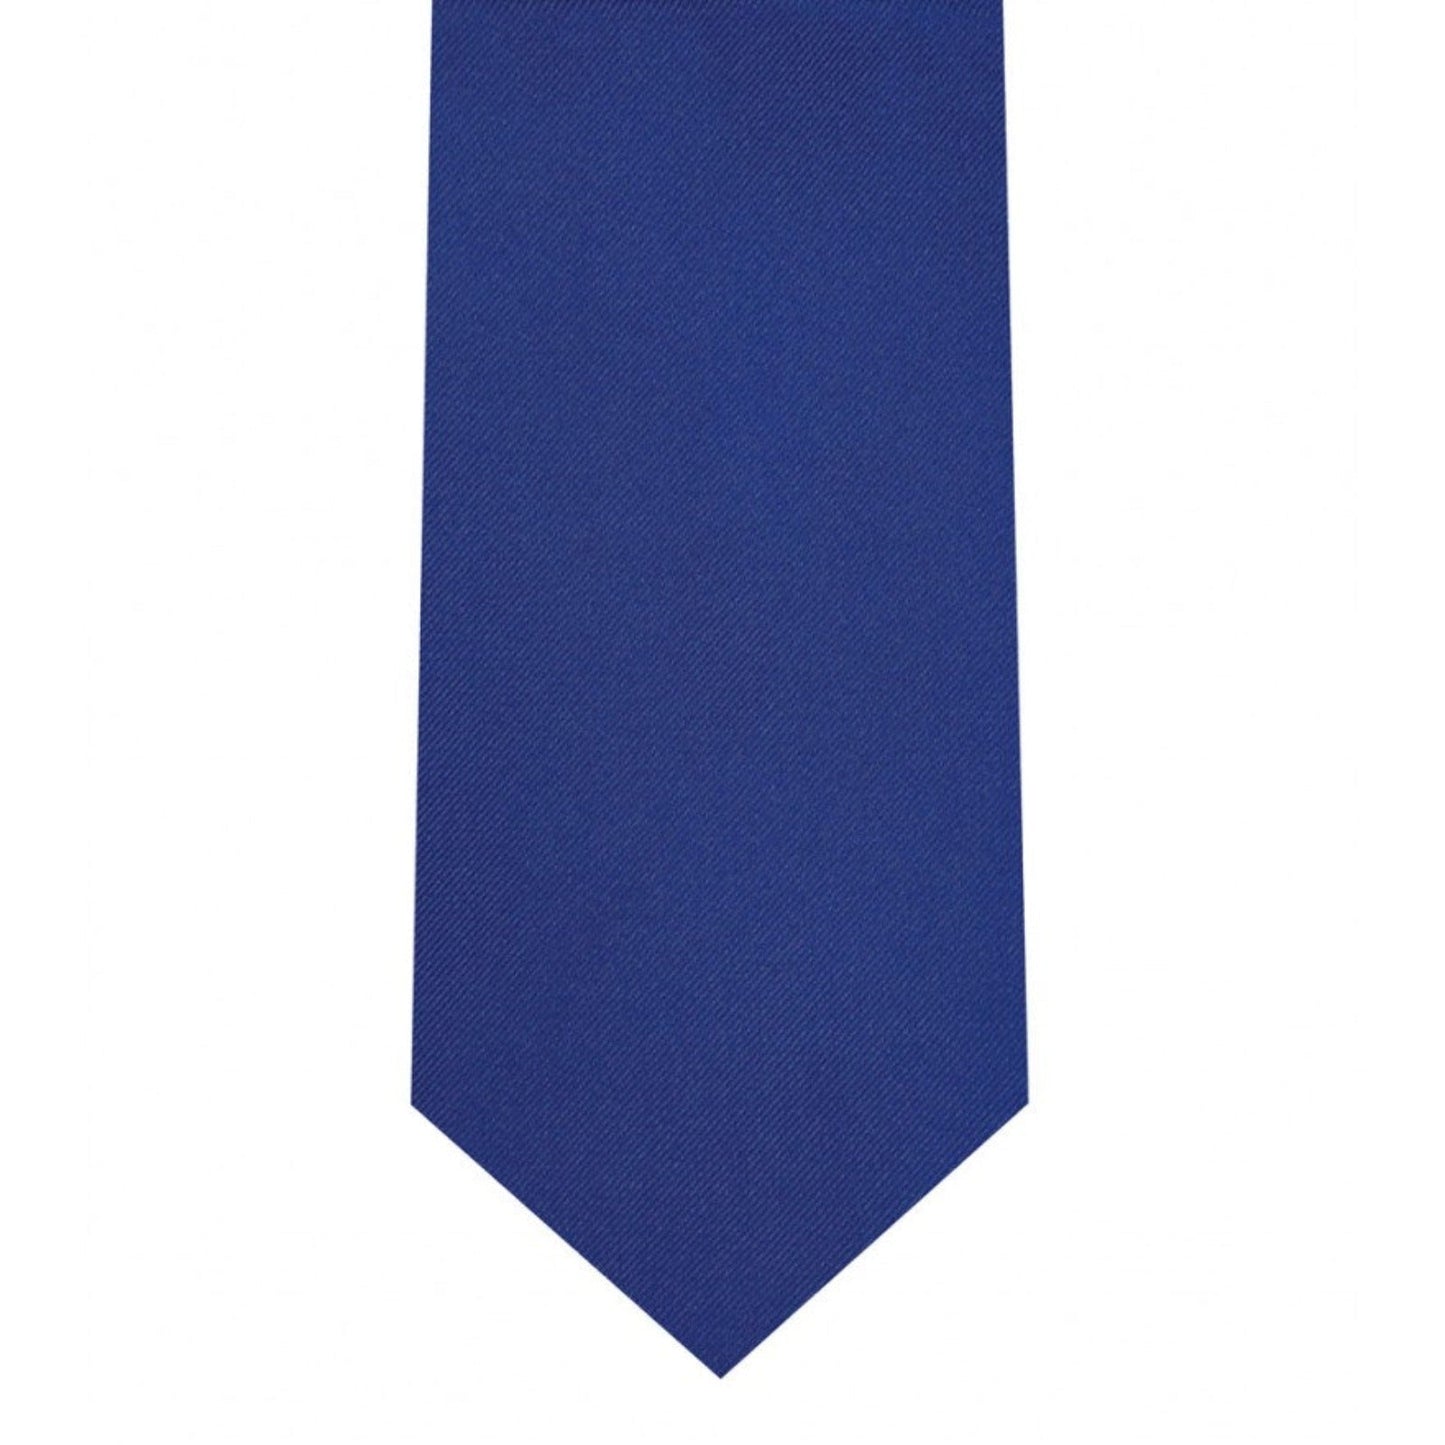 Classic Cobalt Cobalt Tie Skinny width 2.75 inches With Matching Pocket Square | KCT Menswear